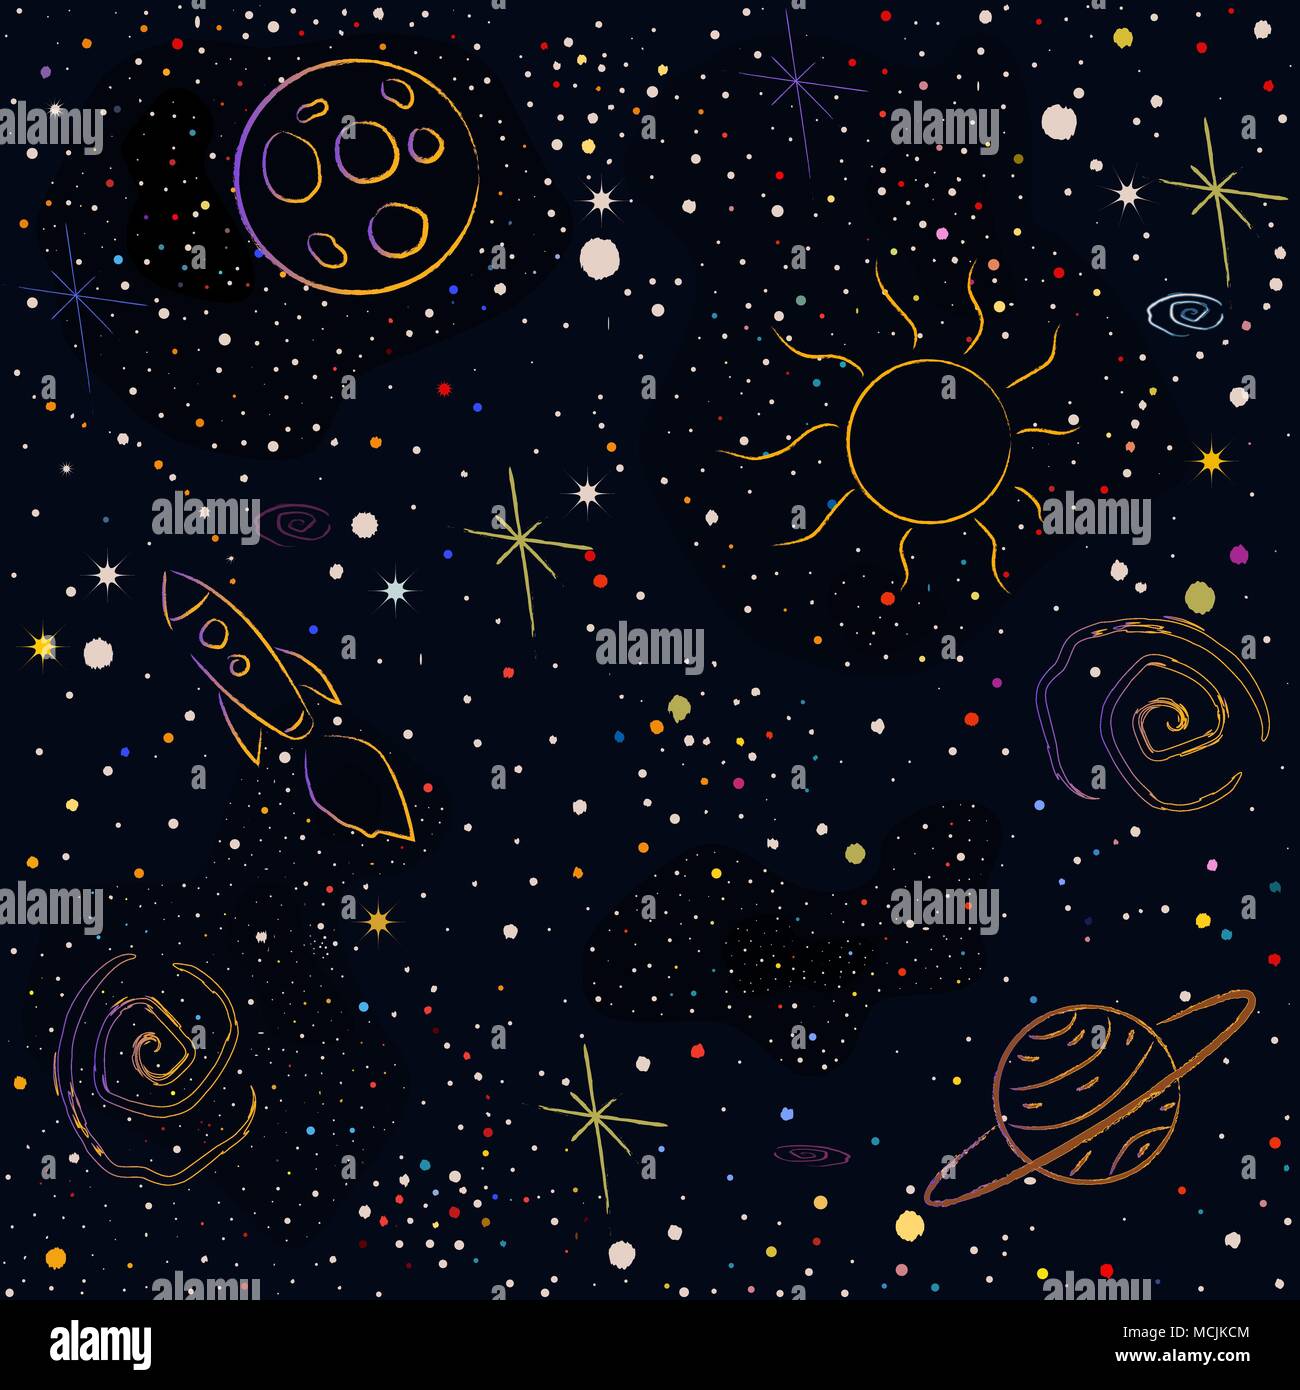 Cosmic Pattern with stars, planets, Moon, rocket, spiral galaxies and constellations in color. Vector Illustration Stock Vector